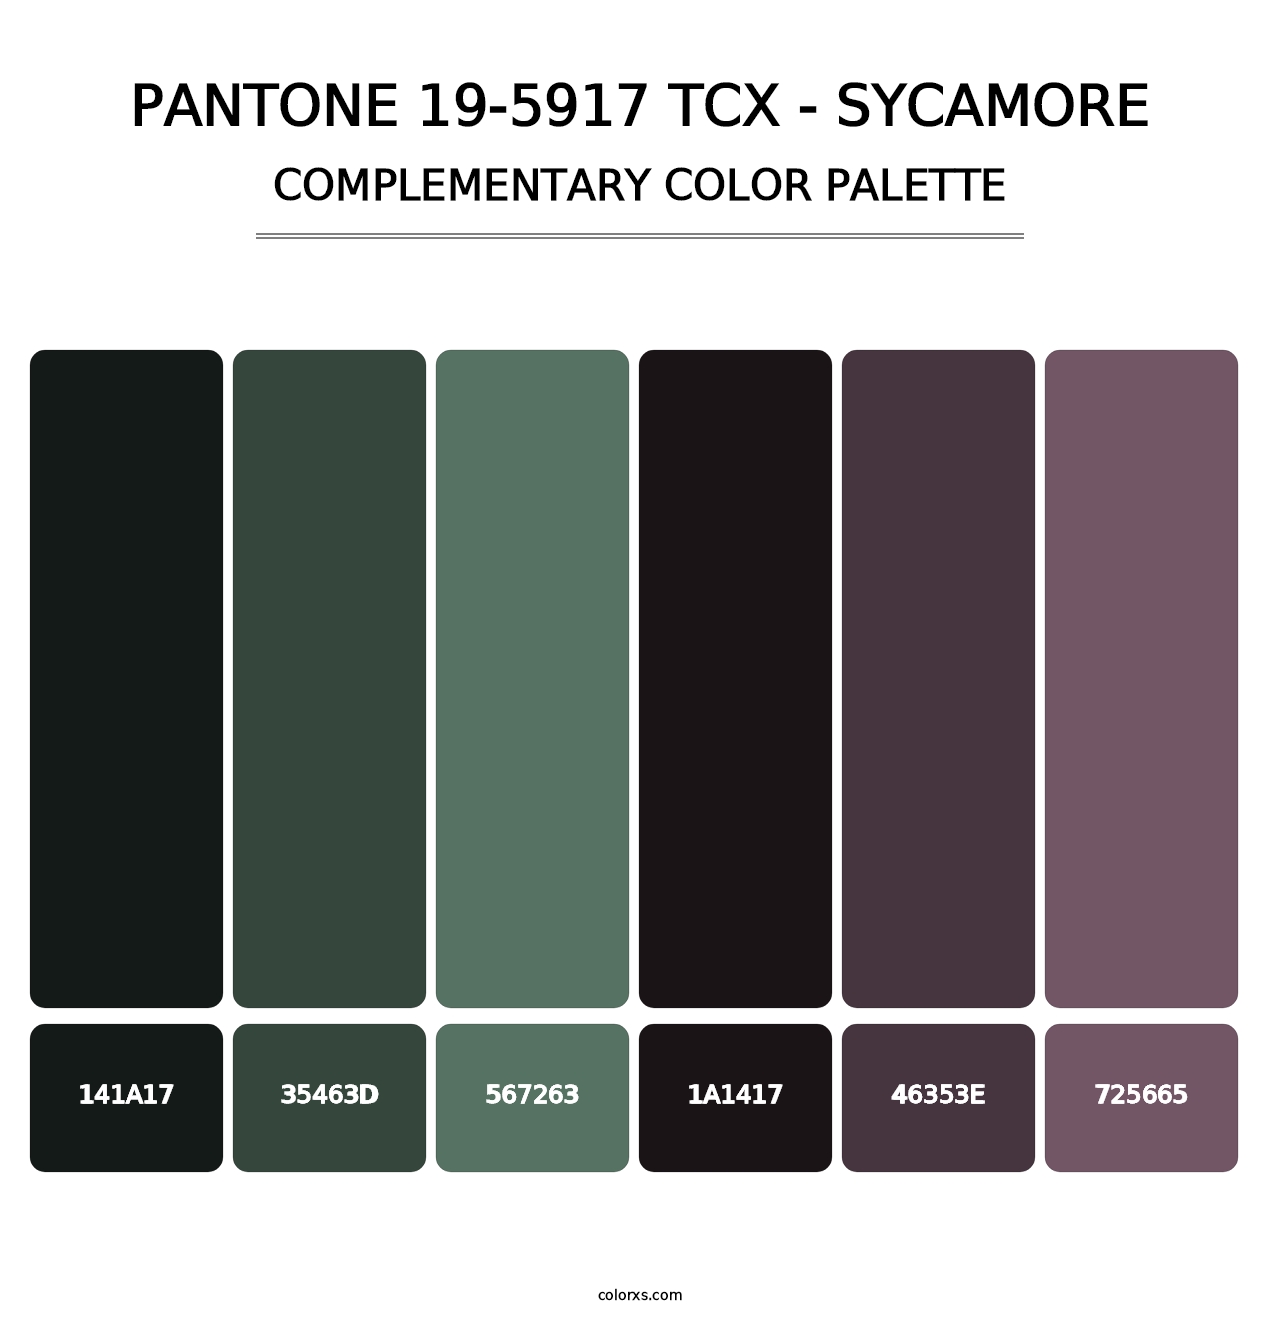 PANTONE 19-5917 TCX - Sycamore - Complementary Color Palette